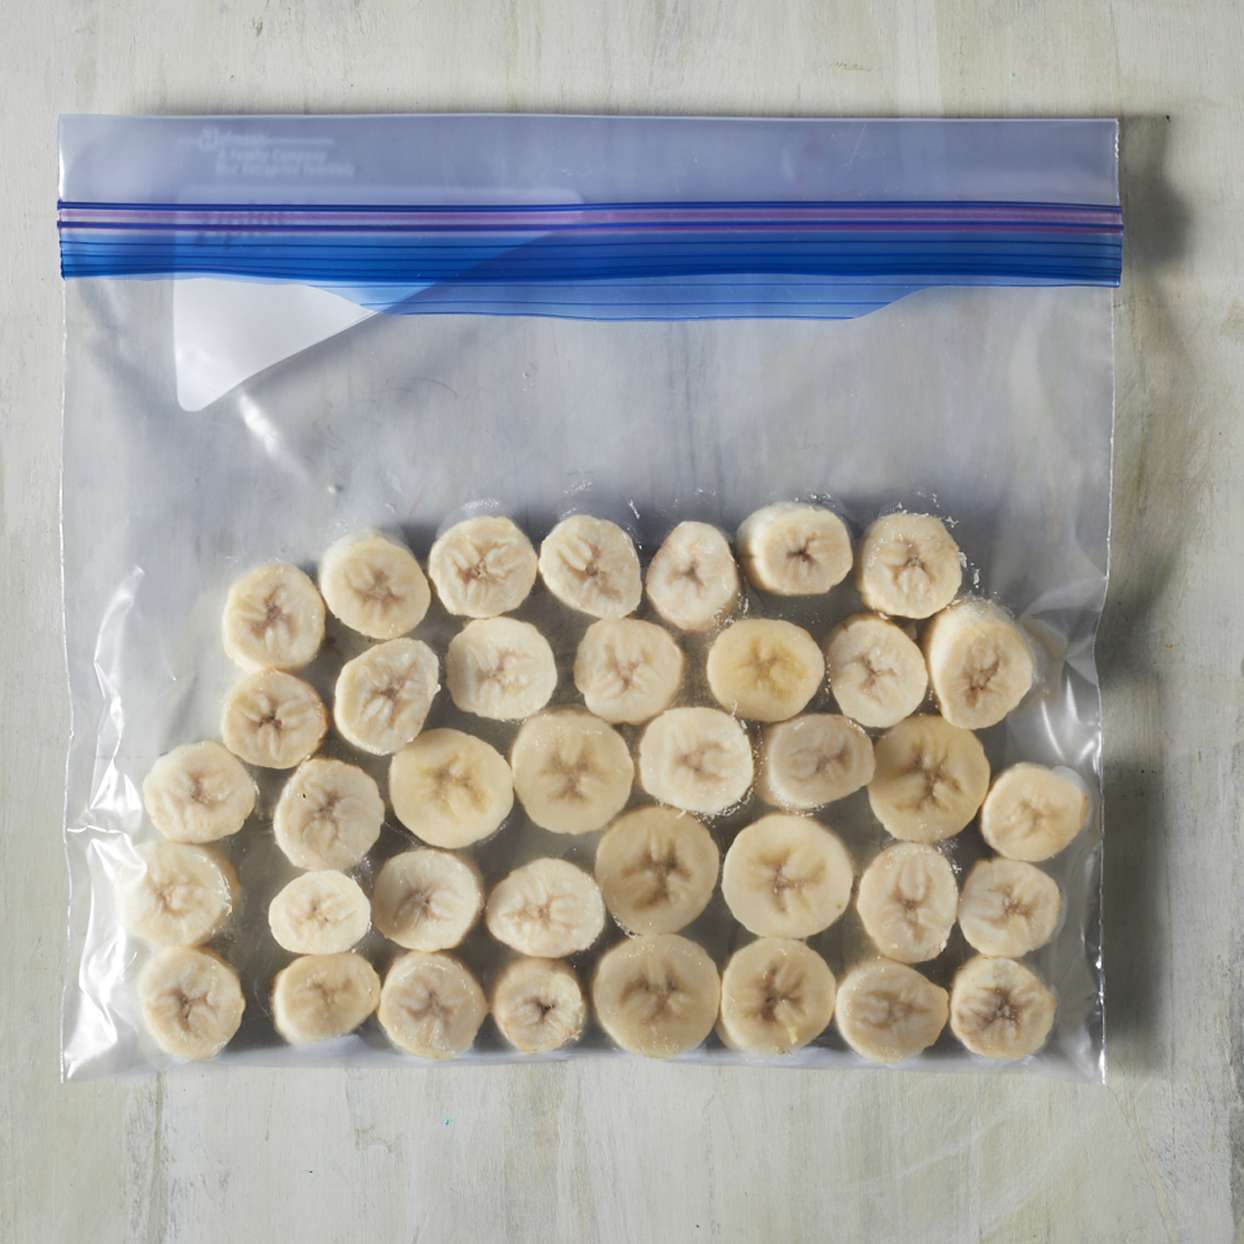 How to Freeze Bananas 1-inch pieces in a plastic bag